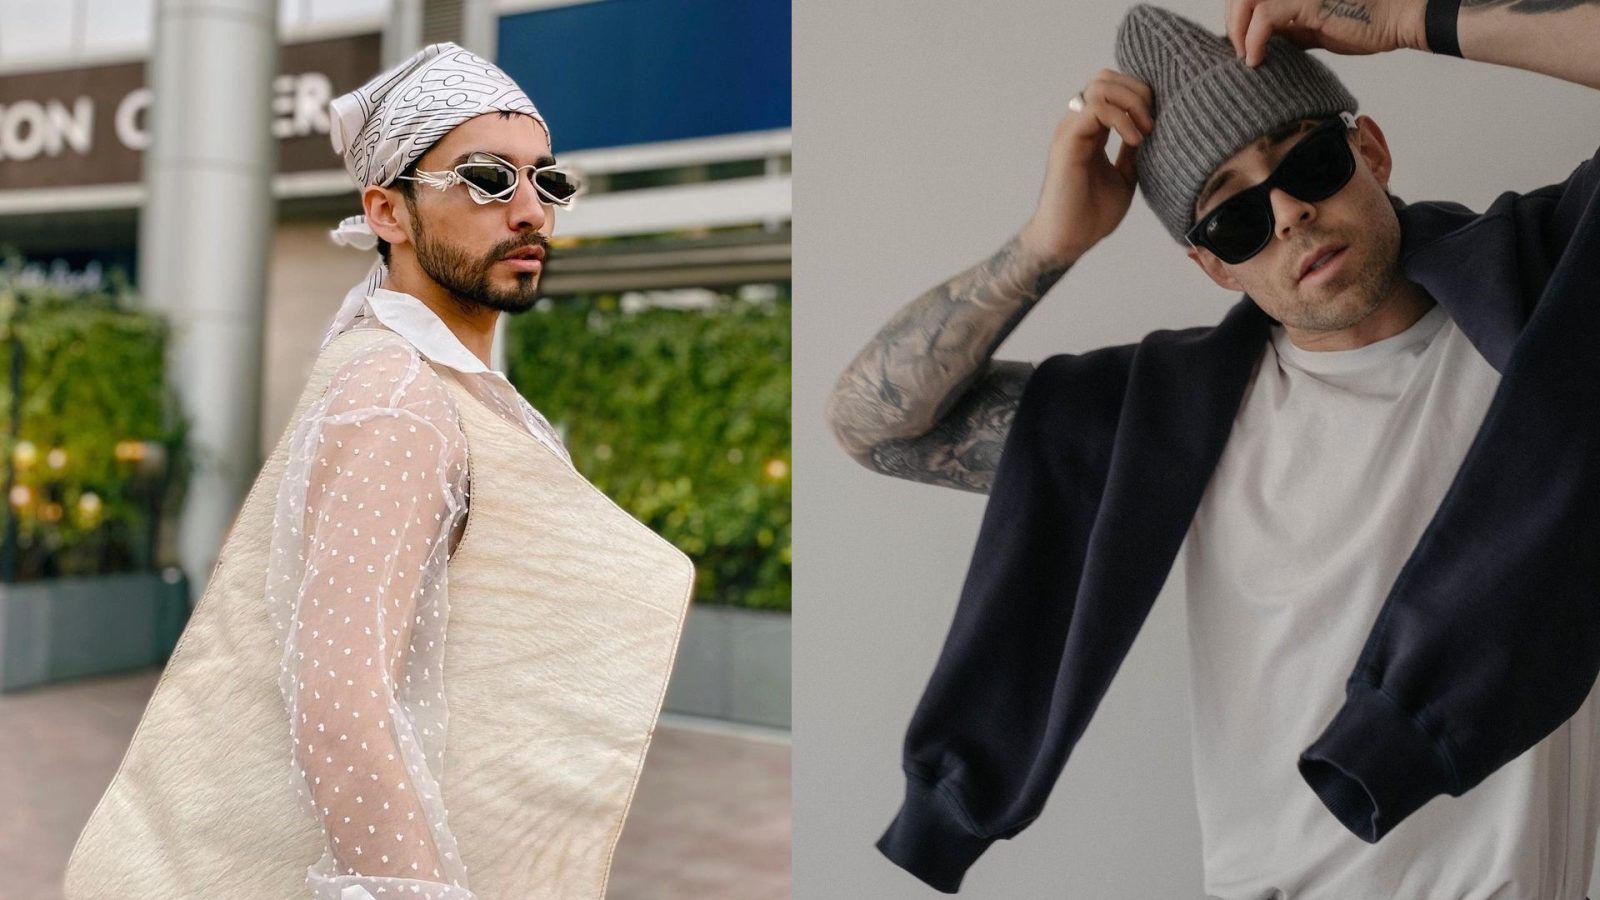 Follow these male fashion influencers for some pro styling tips